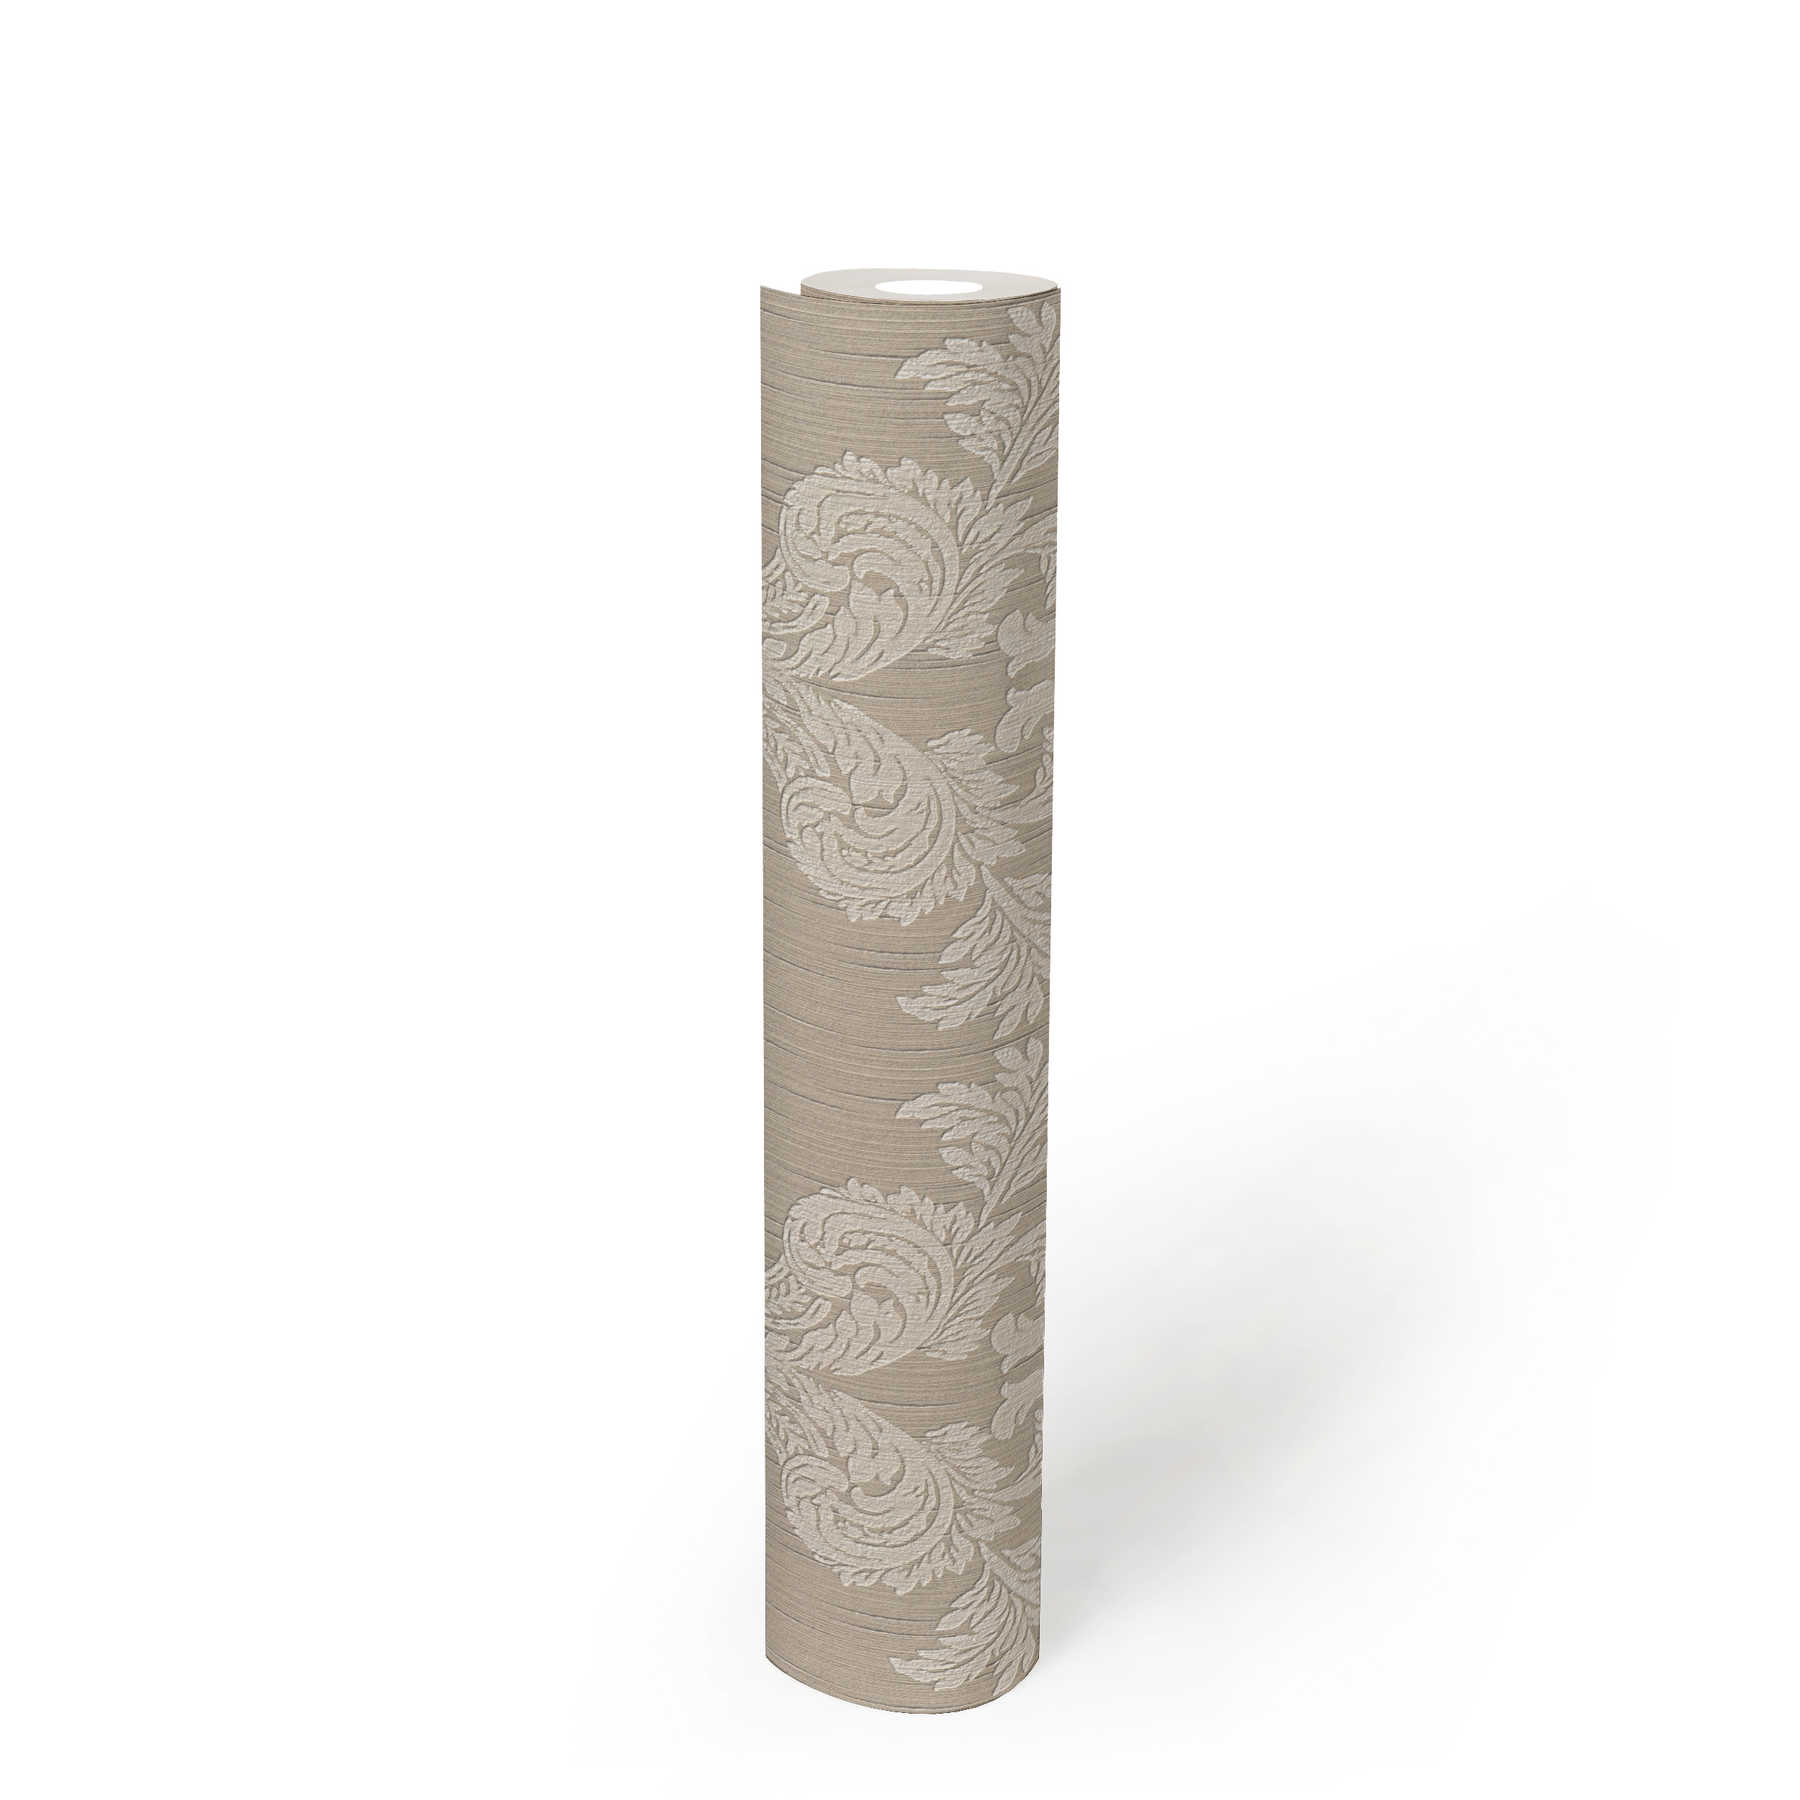             Textile look non-woven wallpaper with structure ornaments - beige
        